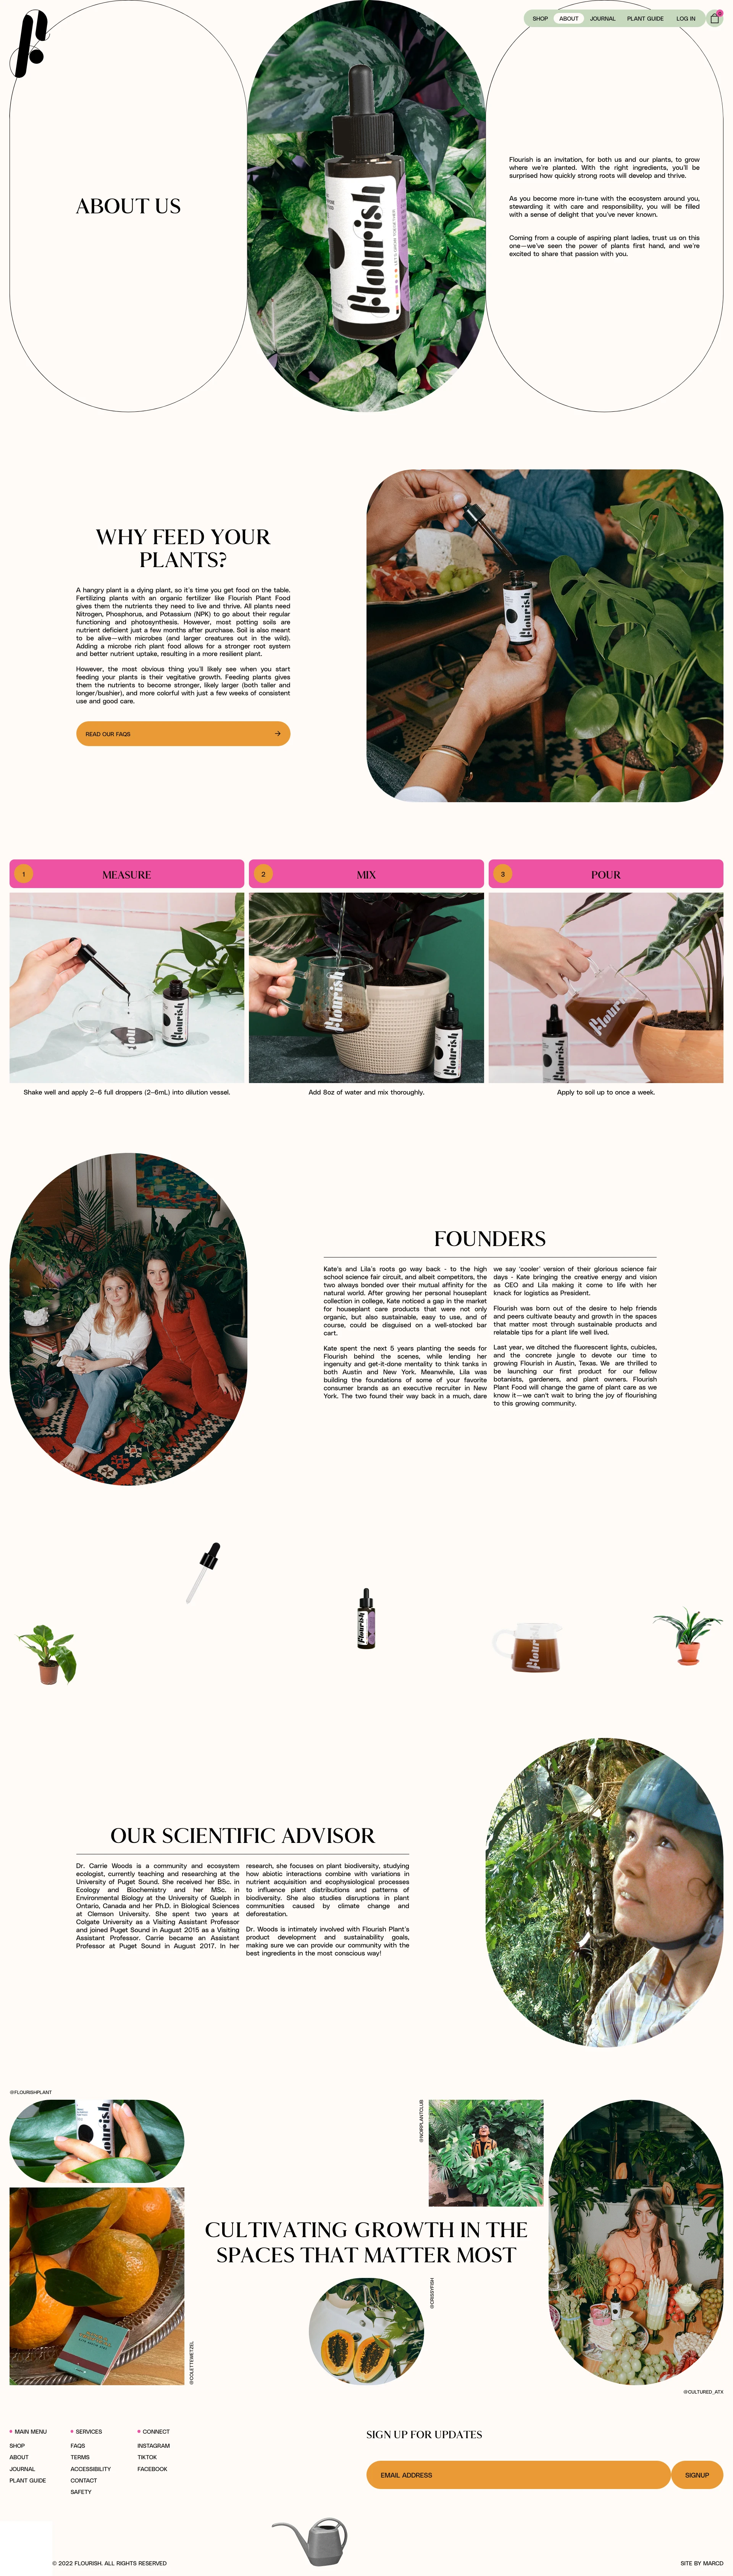 Flourish Landing Page Example: Flourish is rooted in community and committed to being your home base for all things plant care. Use us as a resource and together, let's inspire a world where we can all flourish.